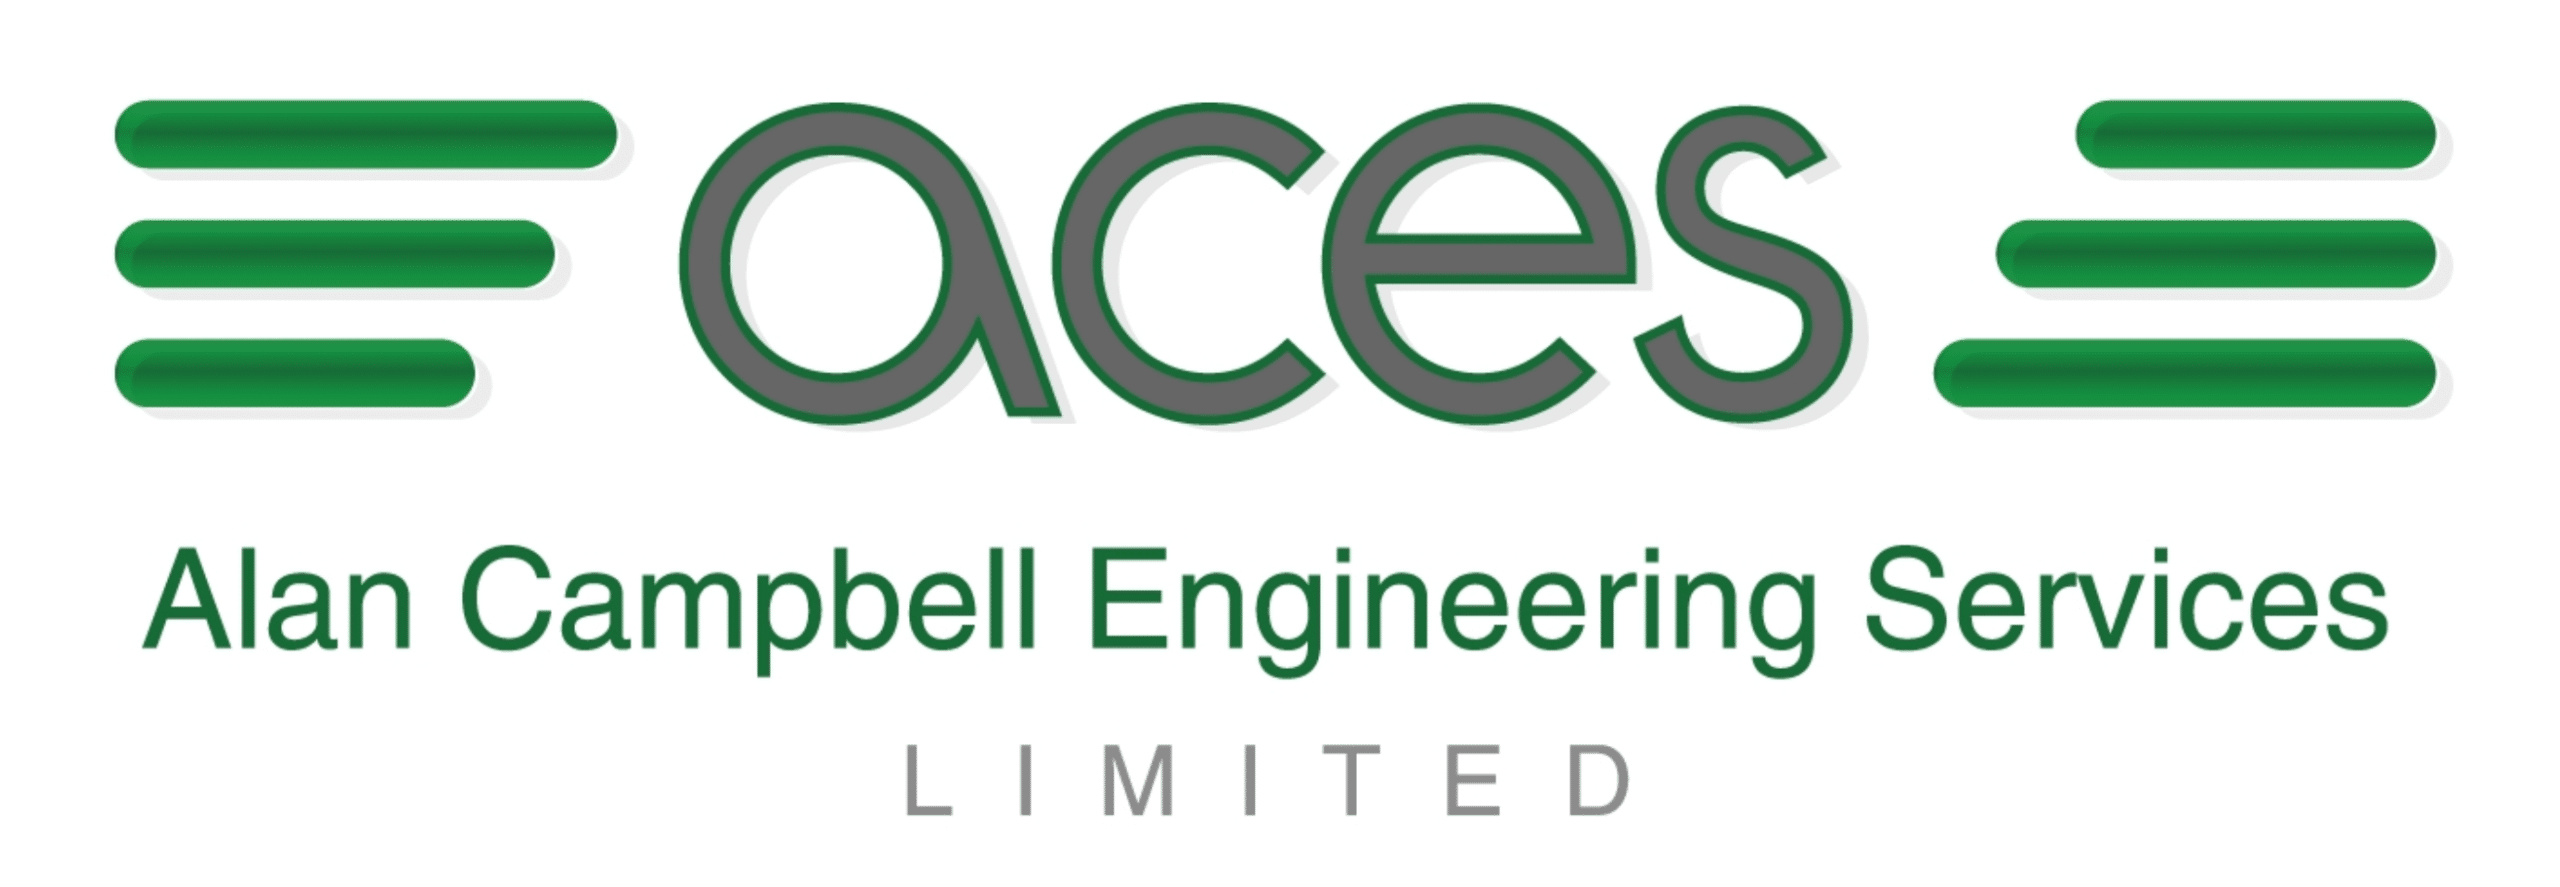 Alan Campbell Engineering Services Limited 